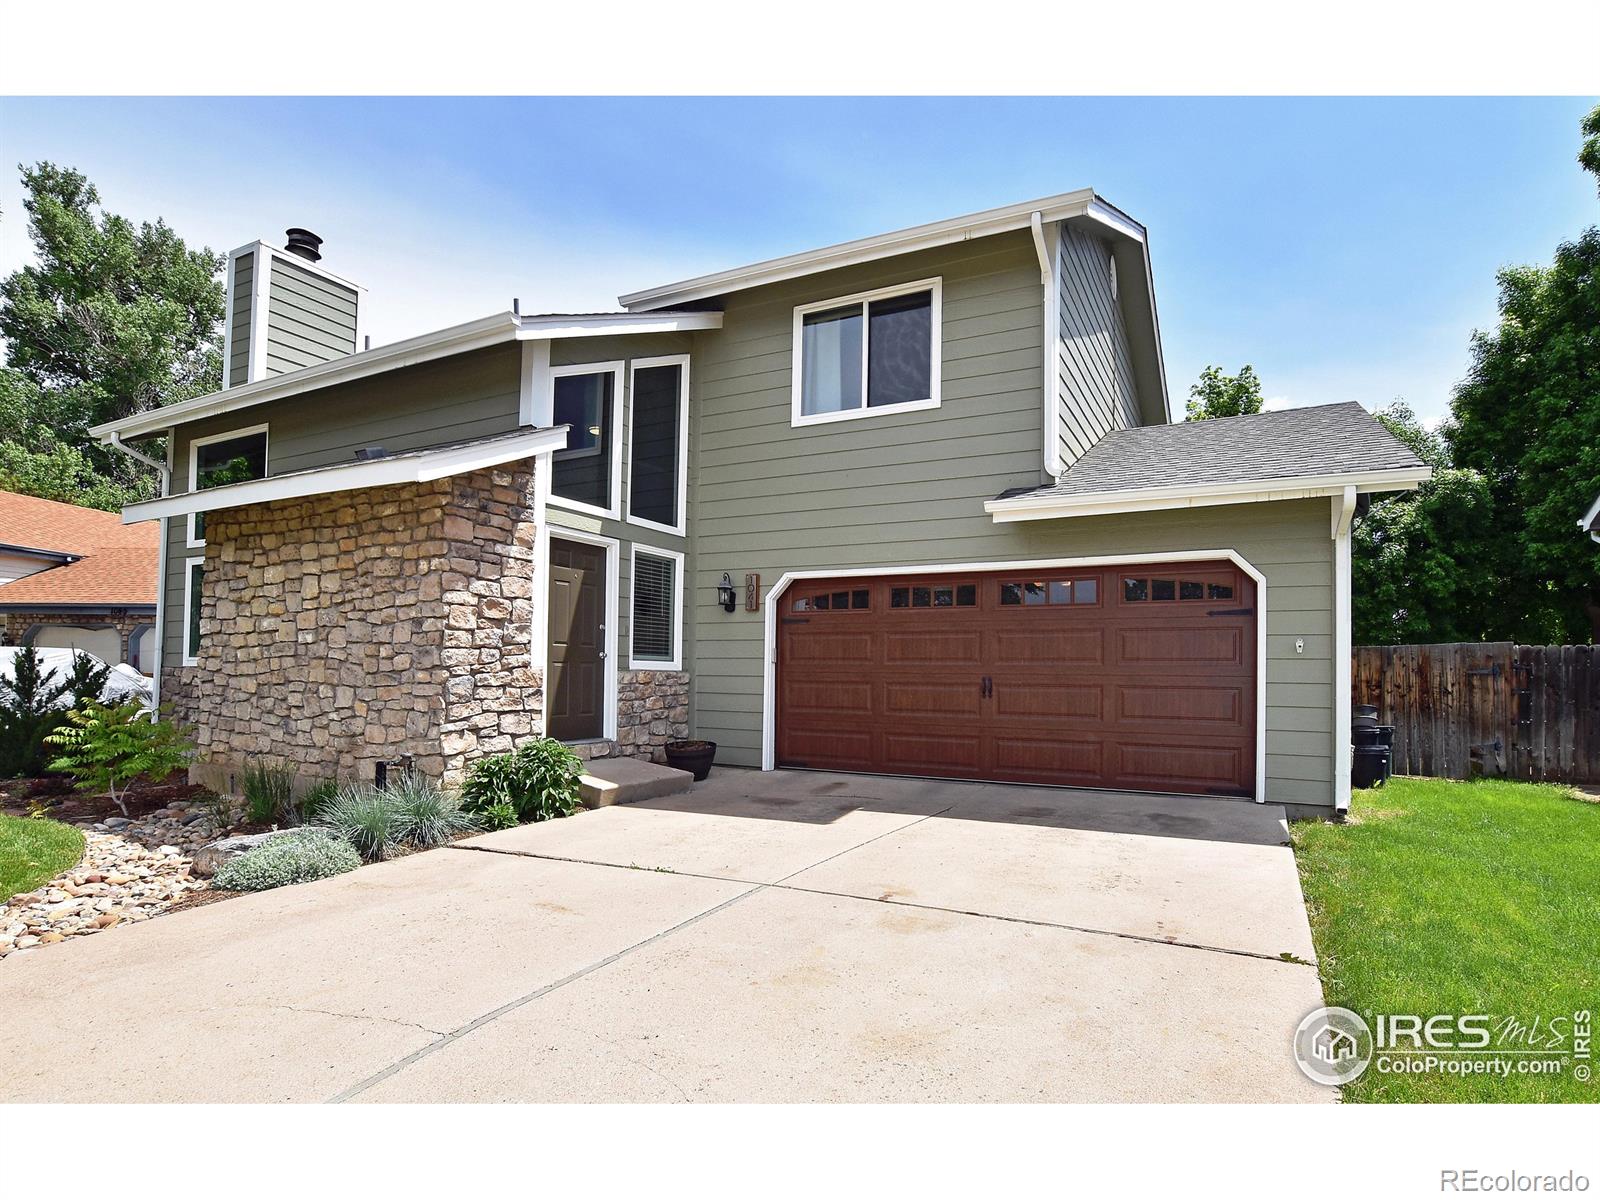 Report Image for 1041  Parkview Drive,Fort Collins, Colorado